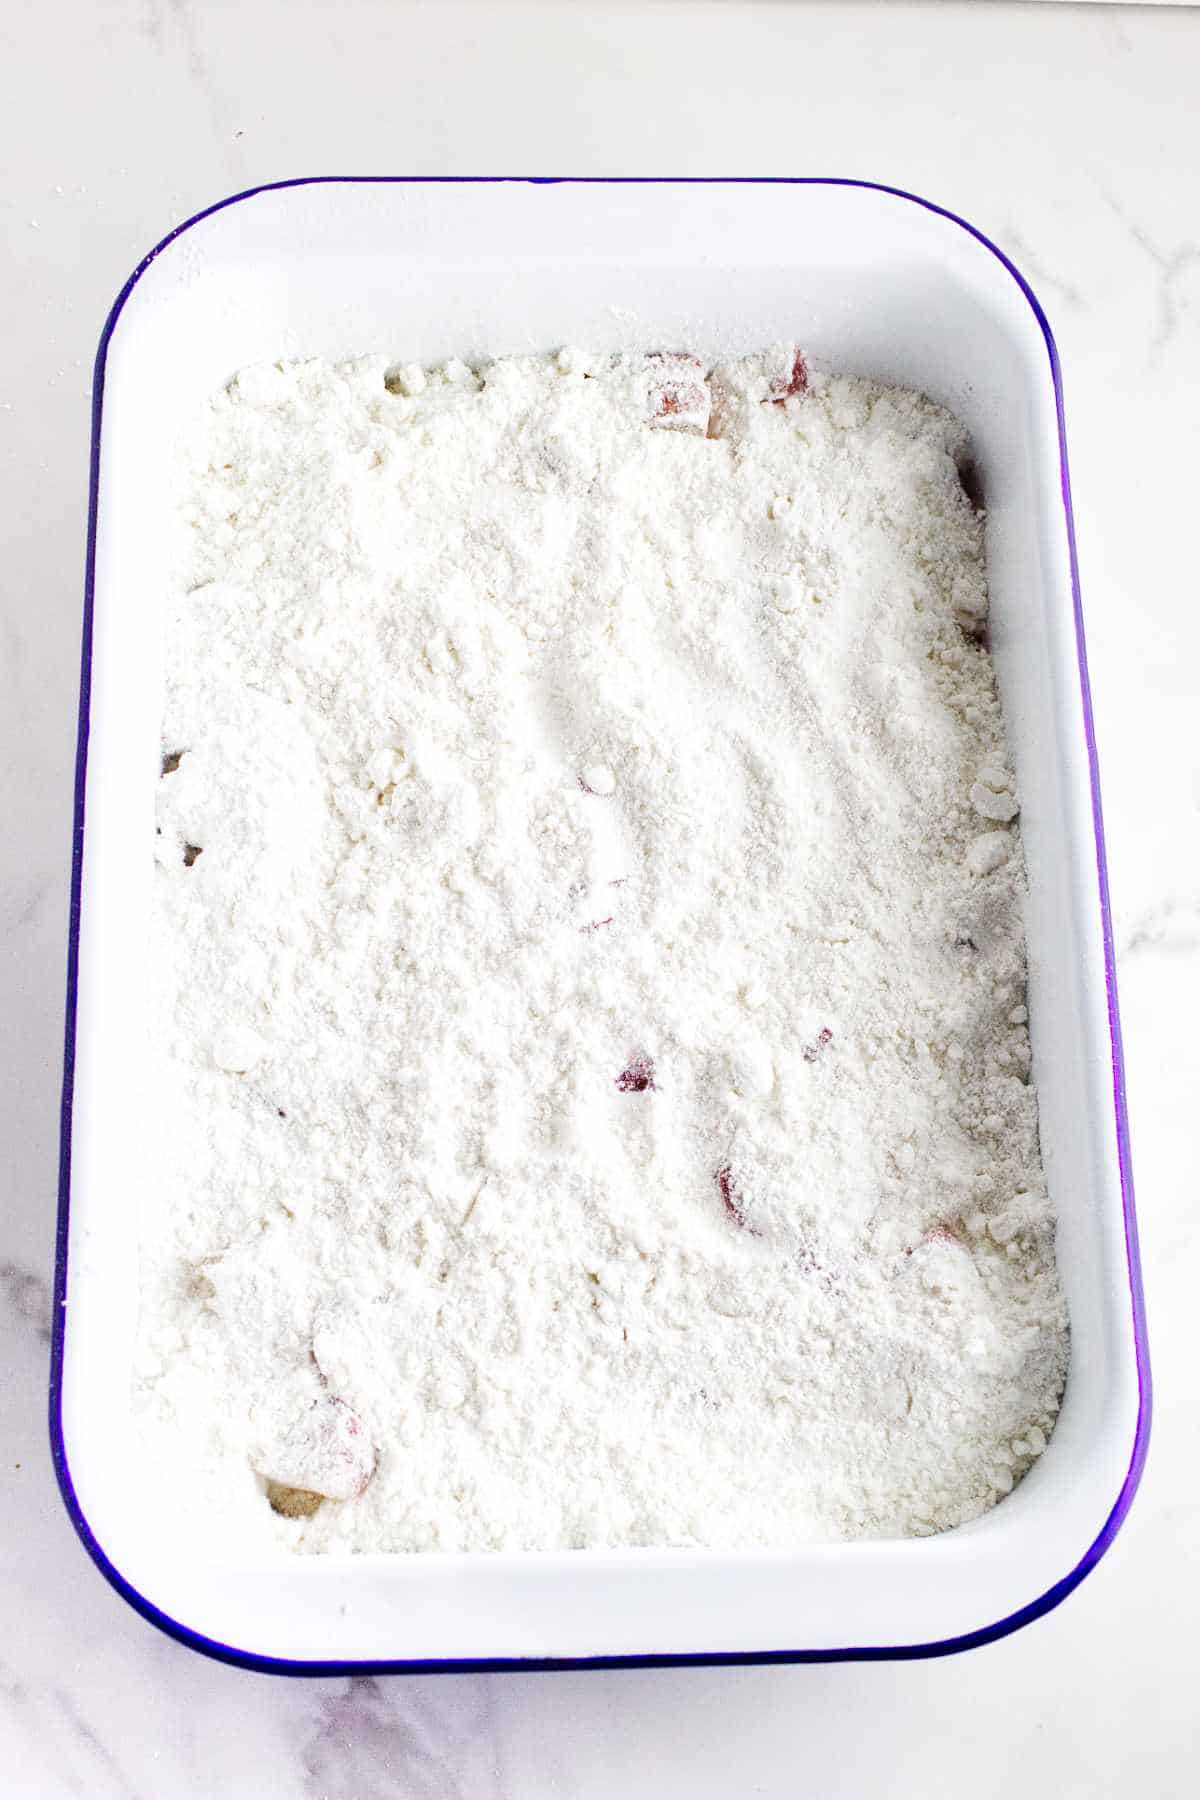 cake mix sprinkled over cut fruit in a baking dish.